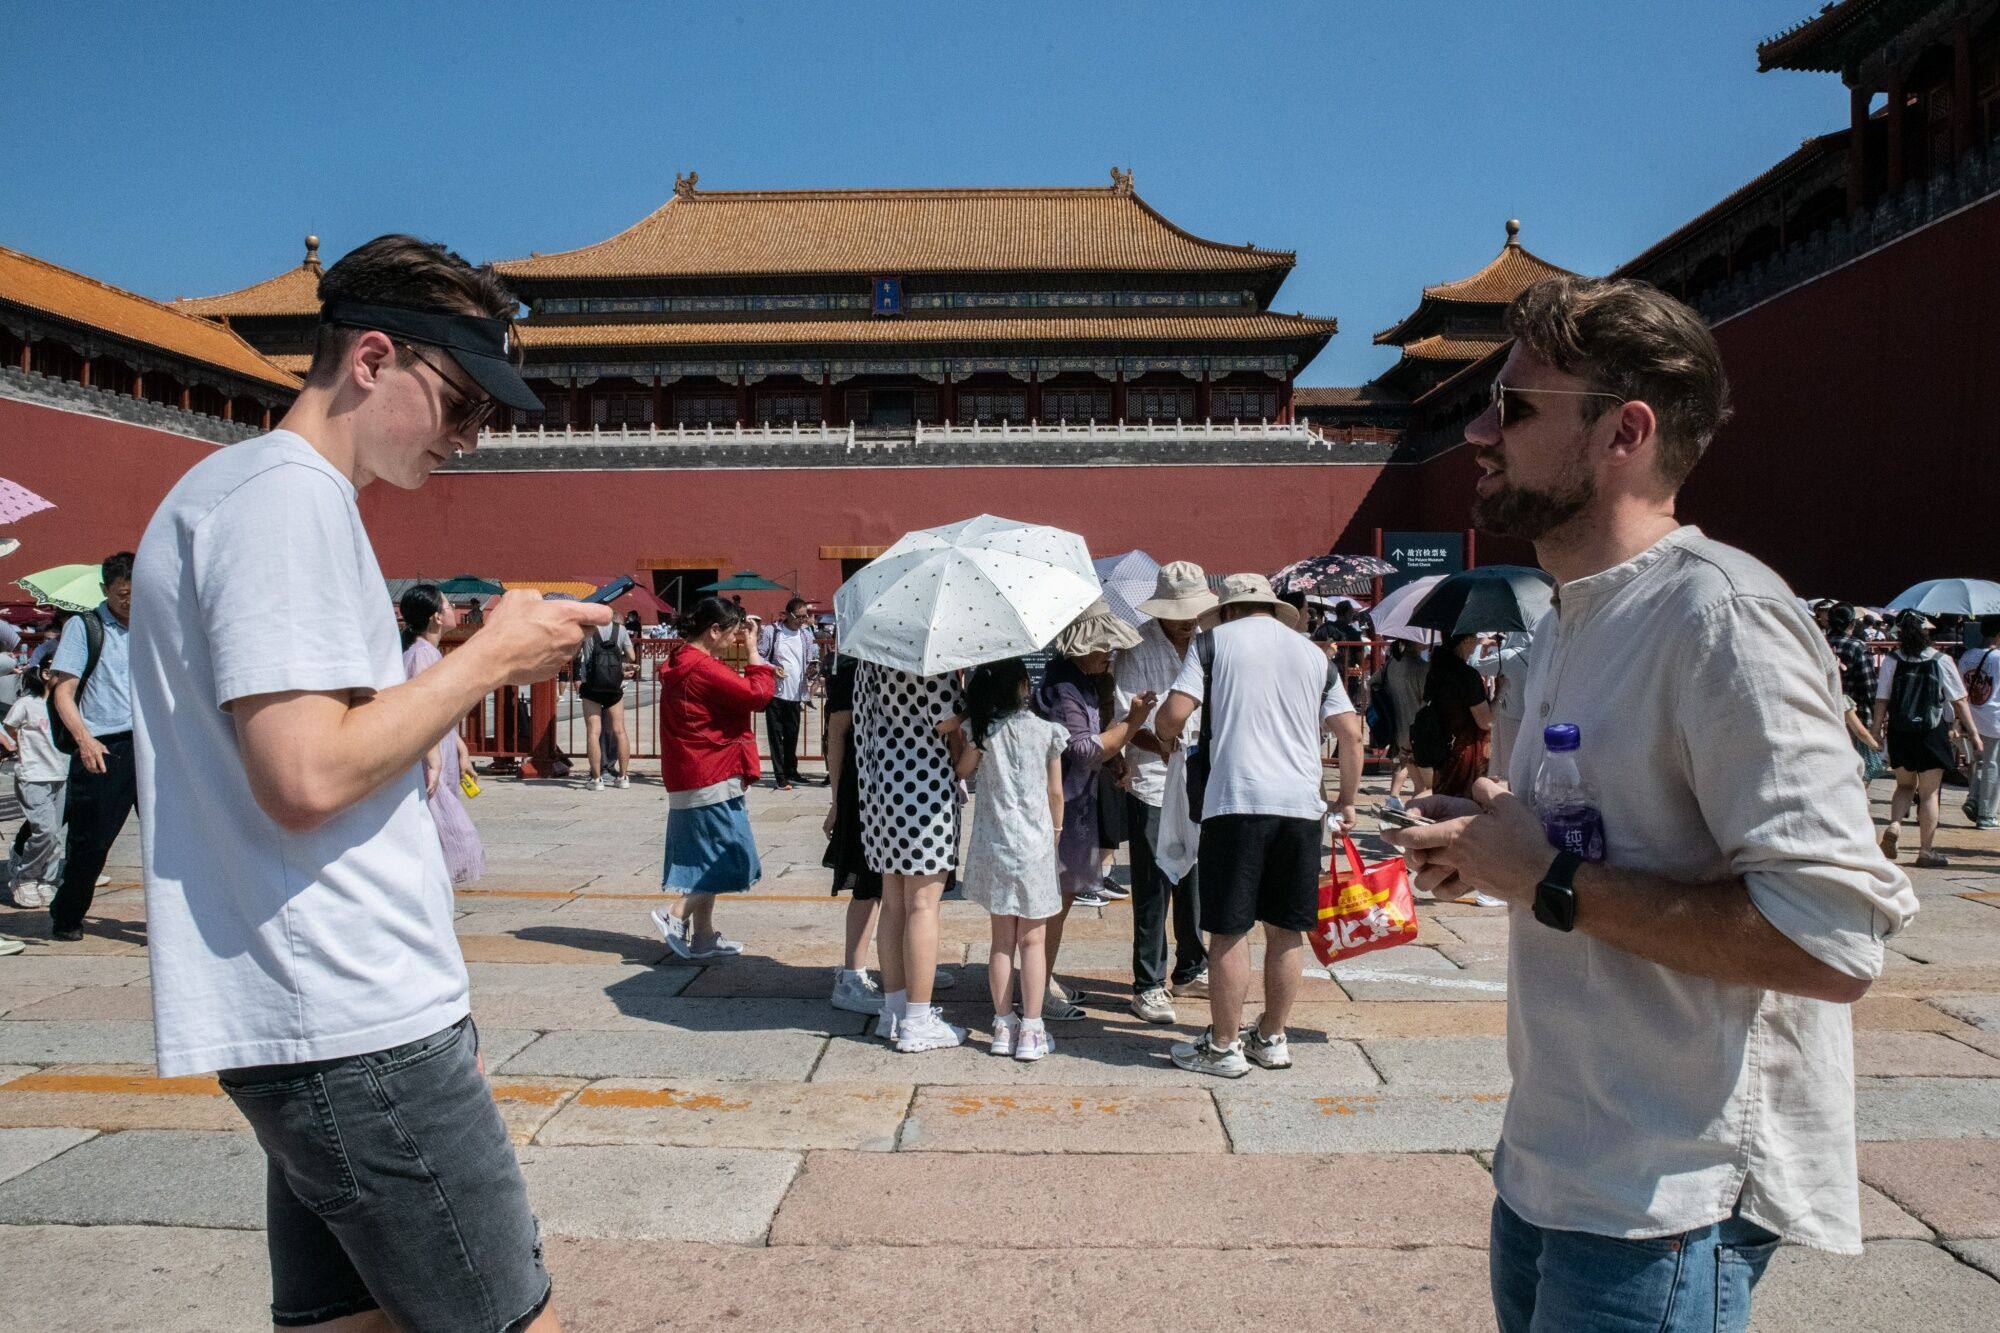 In the month since a visa-free policy was introduced, inbound travel to China from the six countries granted the status rose nearly 30 per cent compared to the month before, according to official data. Photo: Bloomberg